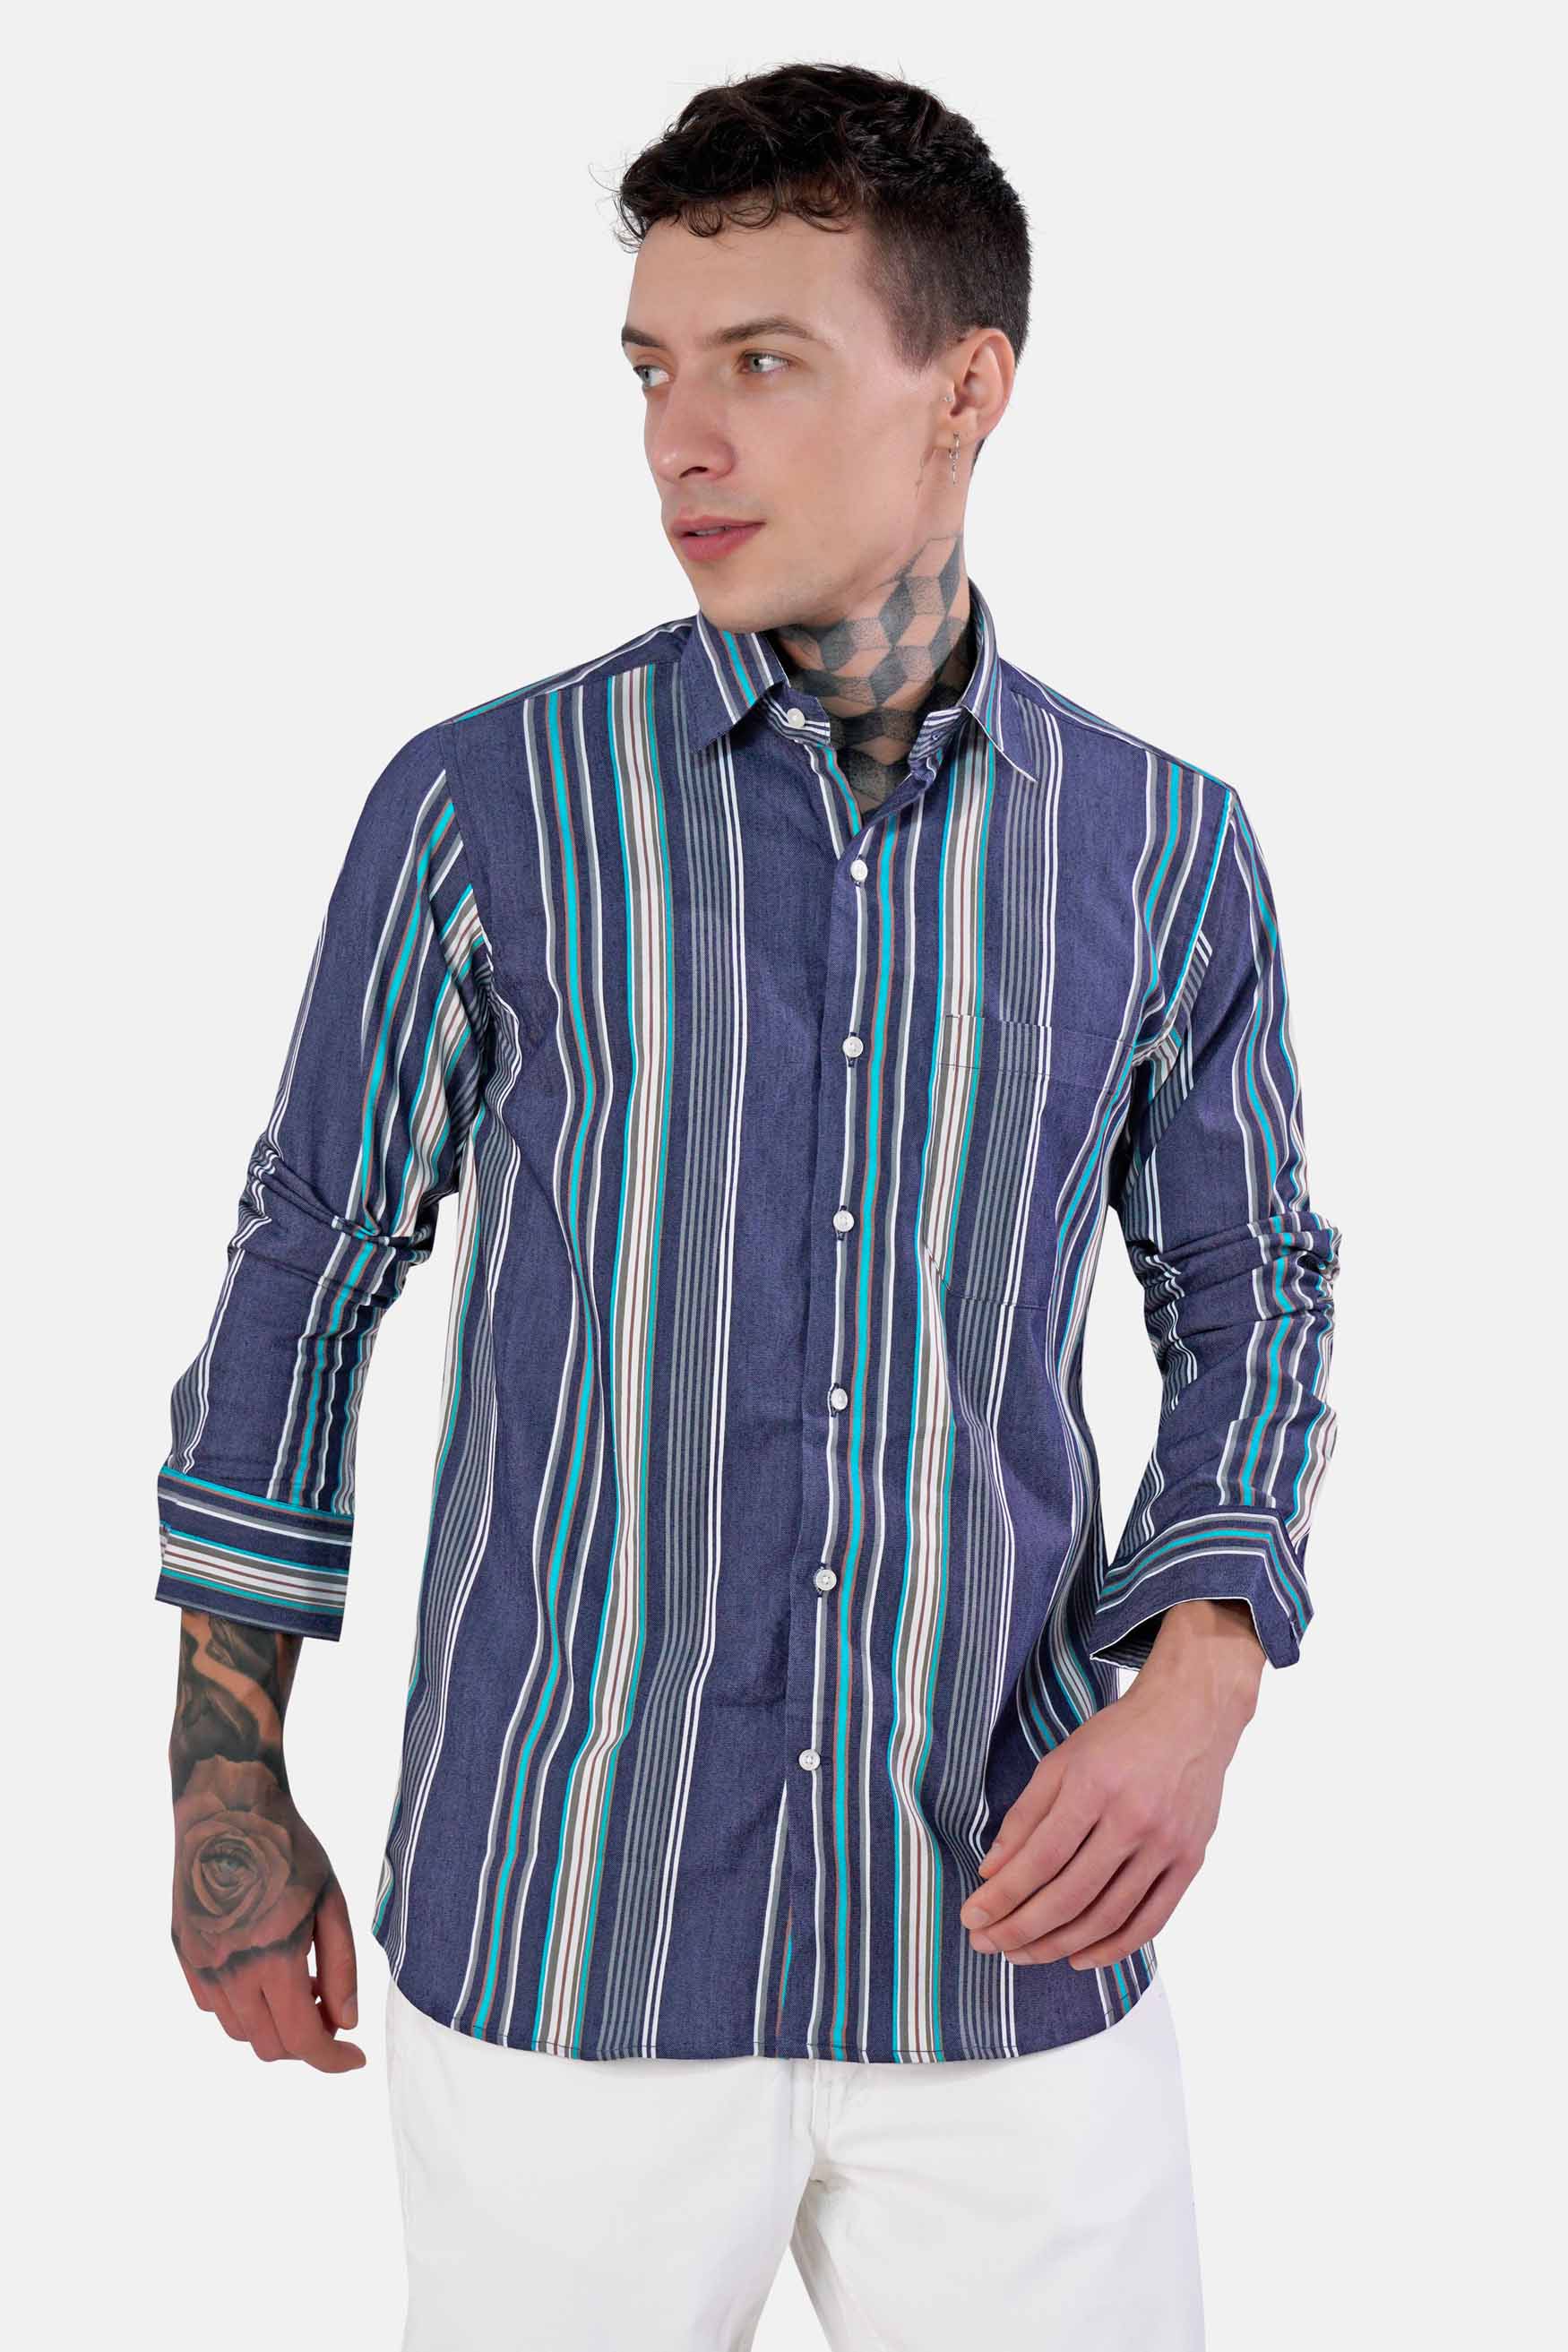 Nile Blue with White and Dusty Brown Striped Indigo Denim Shirt